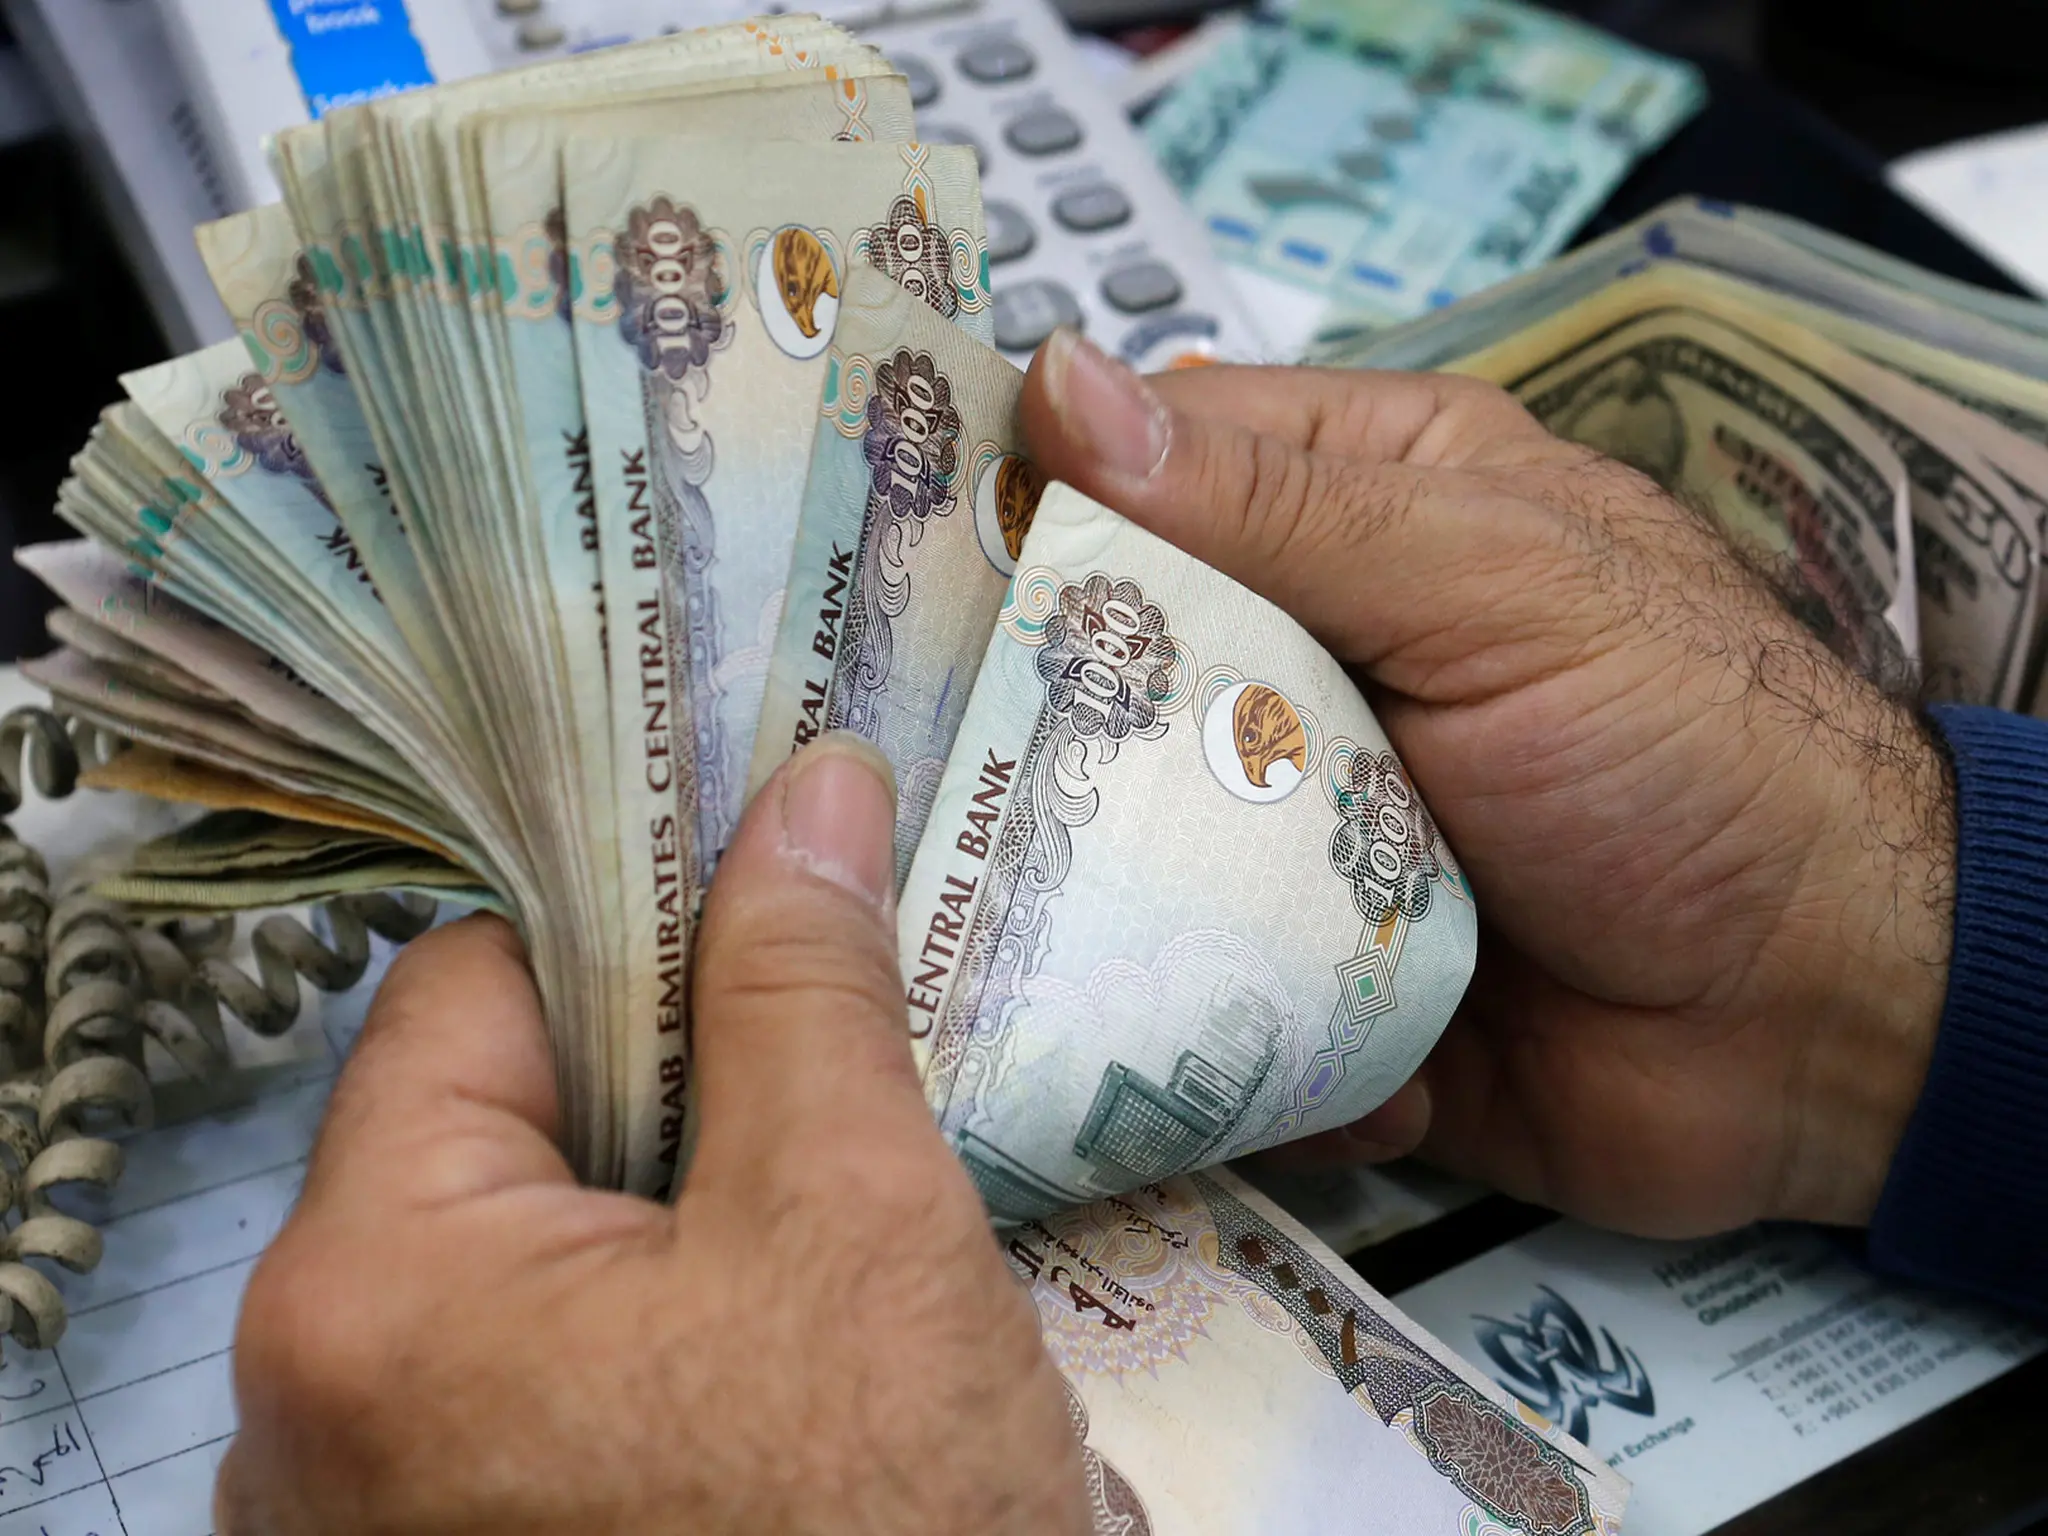 A fine of Dh 200,000 will be collected from violators of the new law in the UAE, starting in May